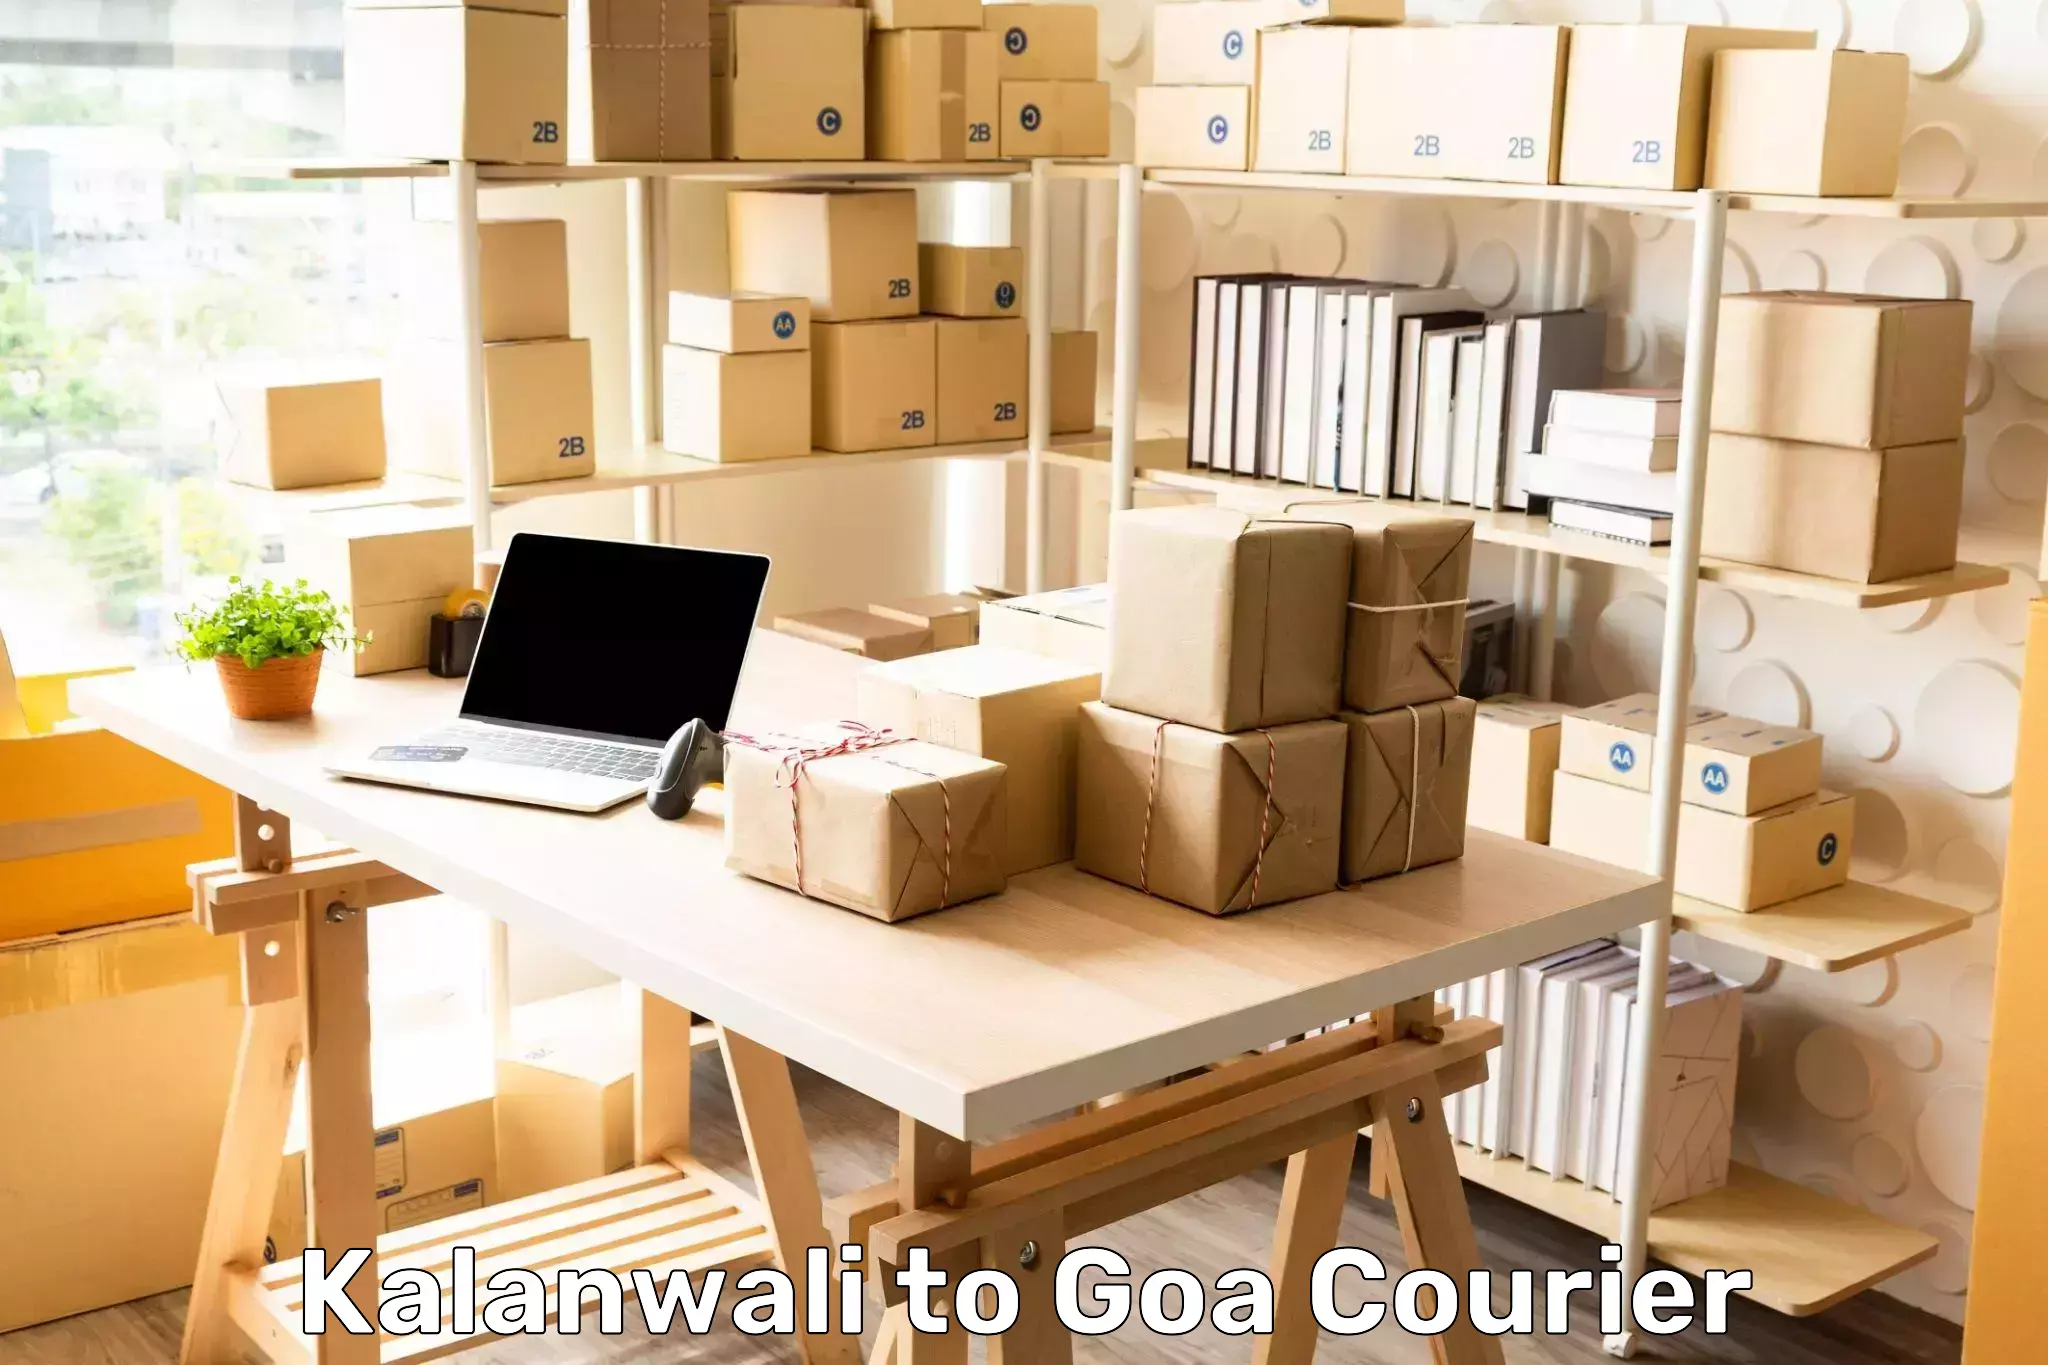 Parcel service for businesses in Kalanwali to South Goa